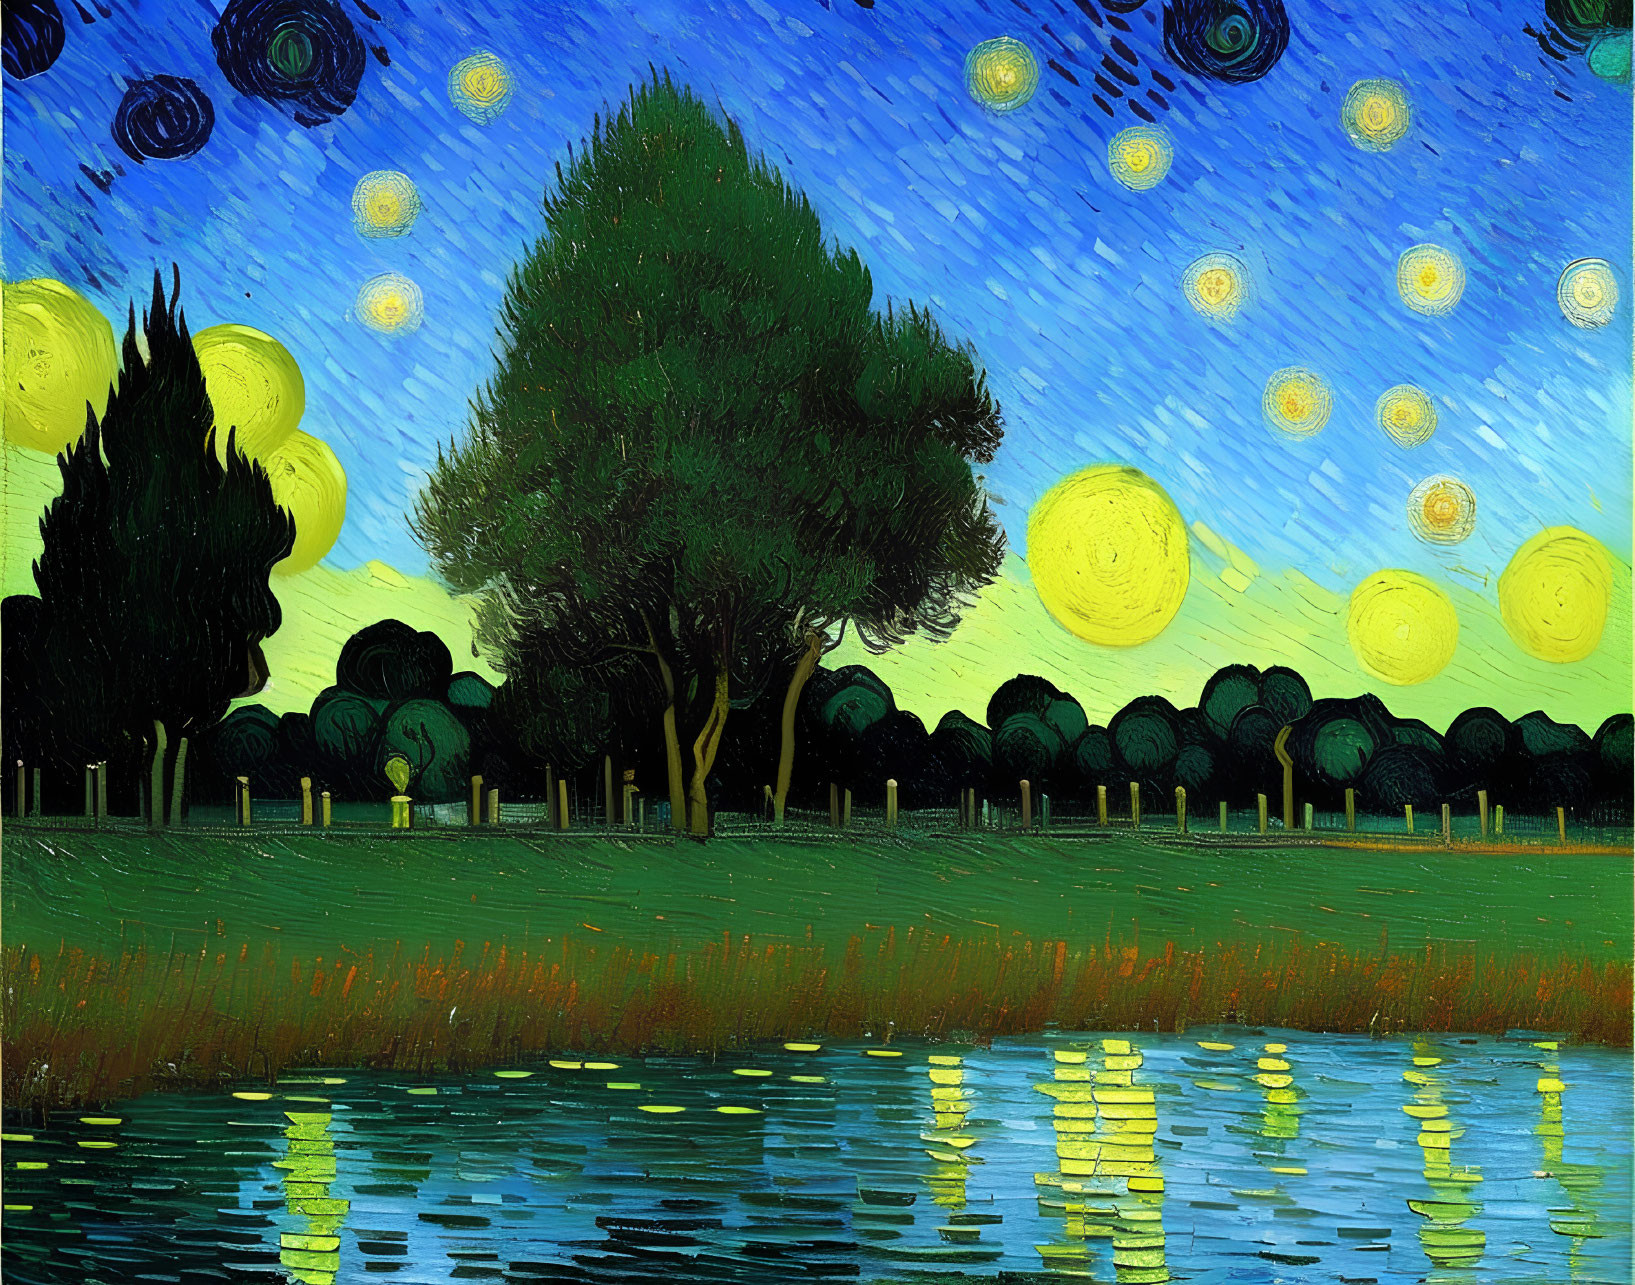 Colorful painting of starry night sky over landscape with swirling patterns and trees reflecting on water